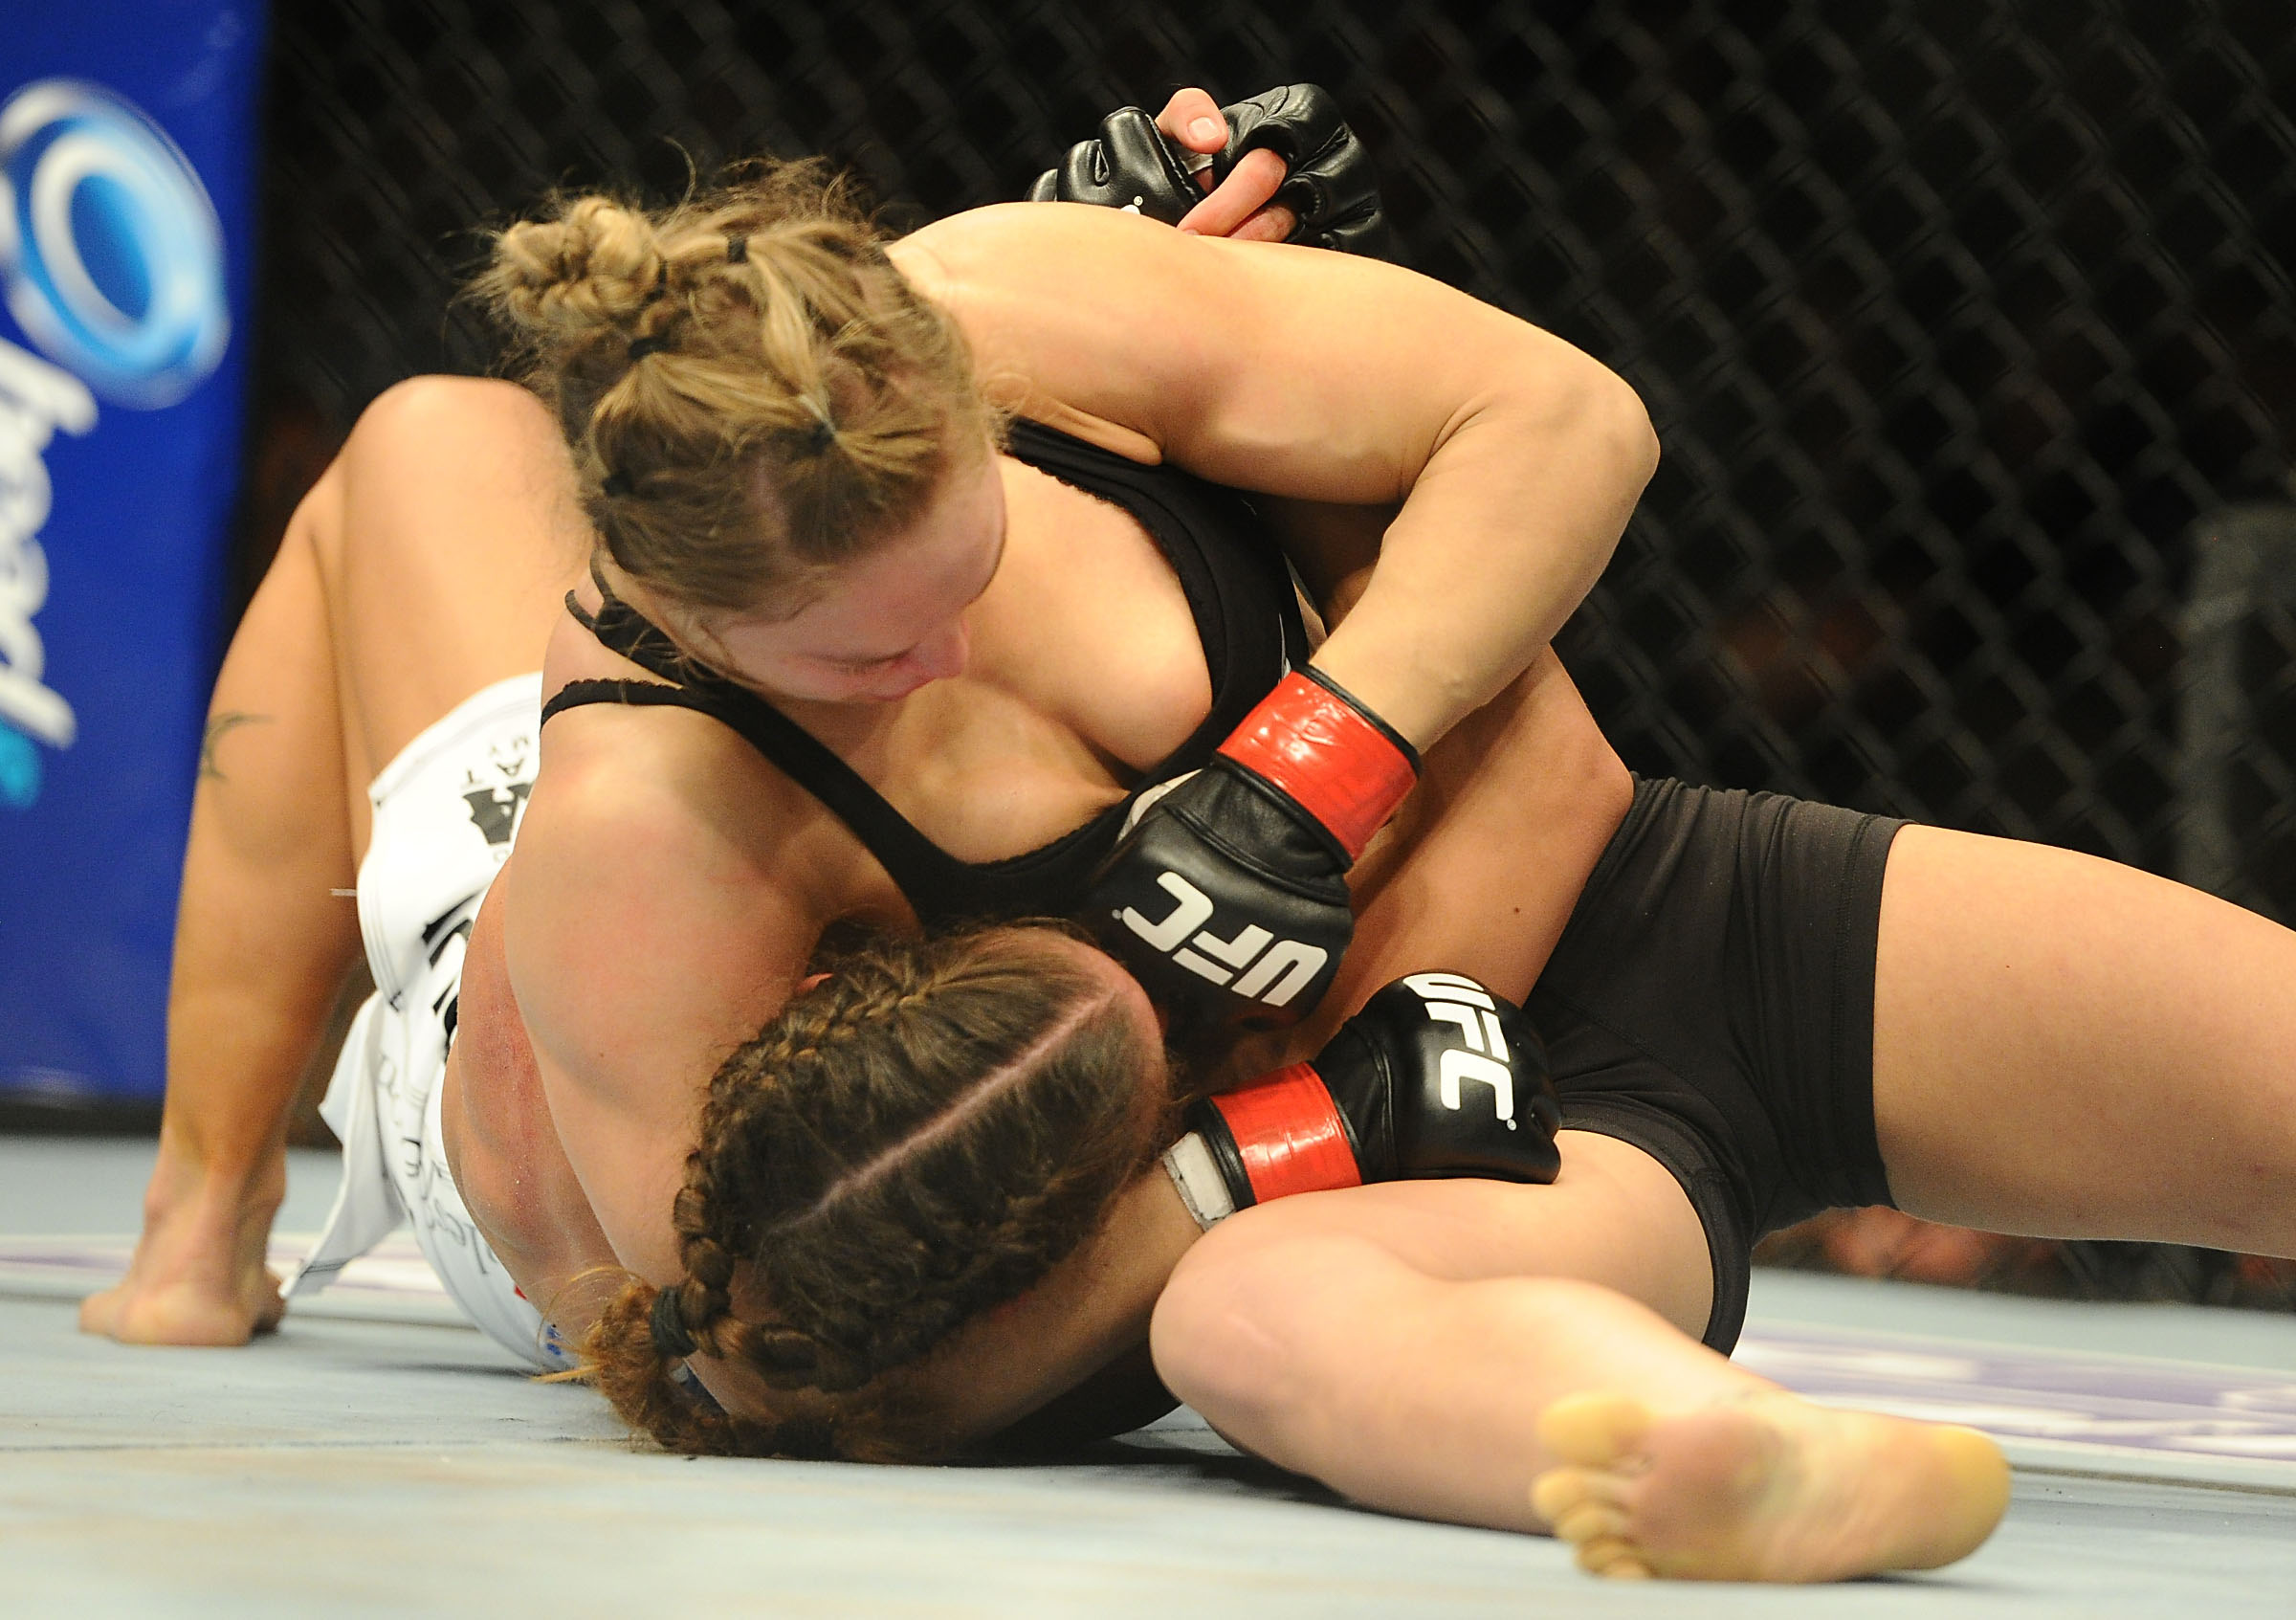 Champion Ronda Rousey (top) defeated Liz Carmouche at UFC 157 in the first women's fight in UFC history. (Jayne Kamin-Oncea-USA TODAY Sports)